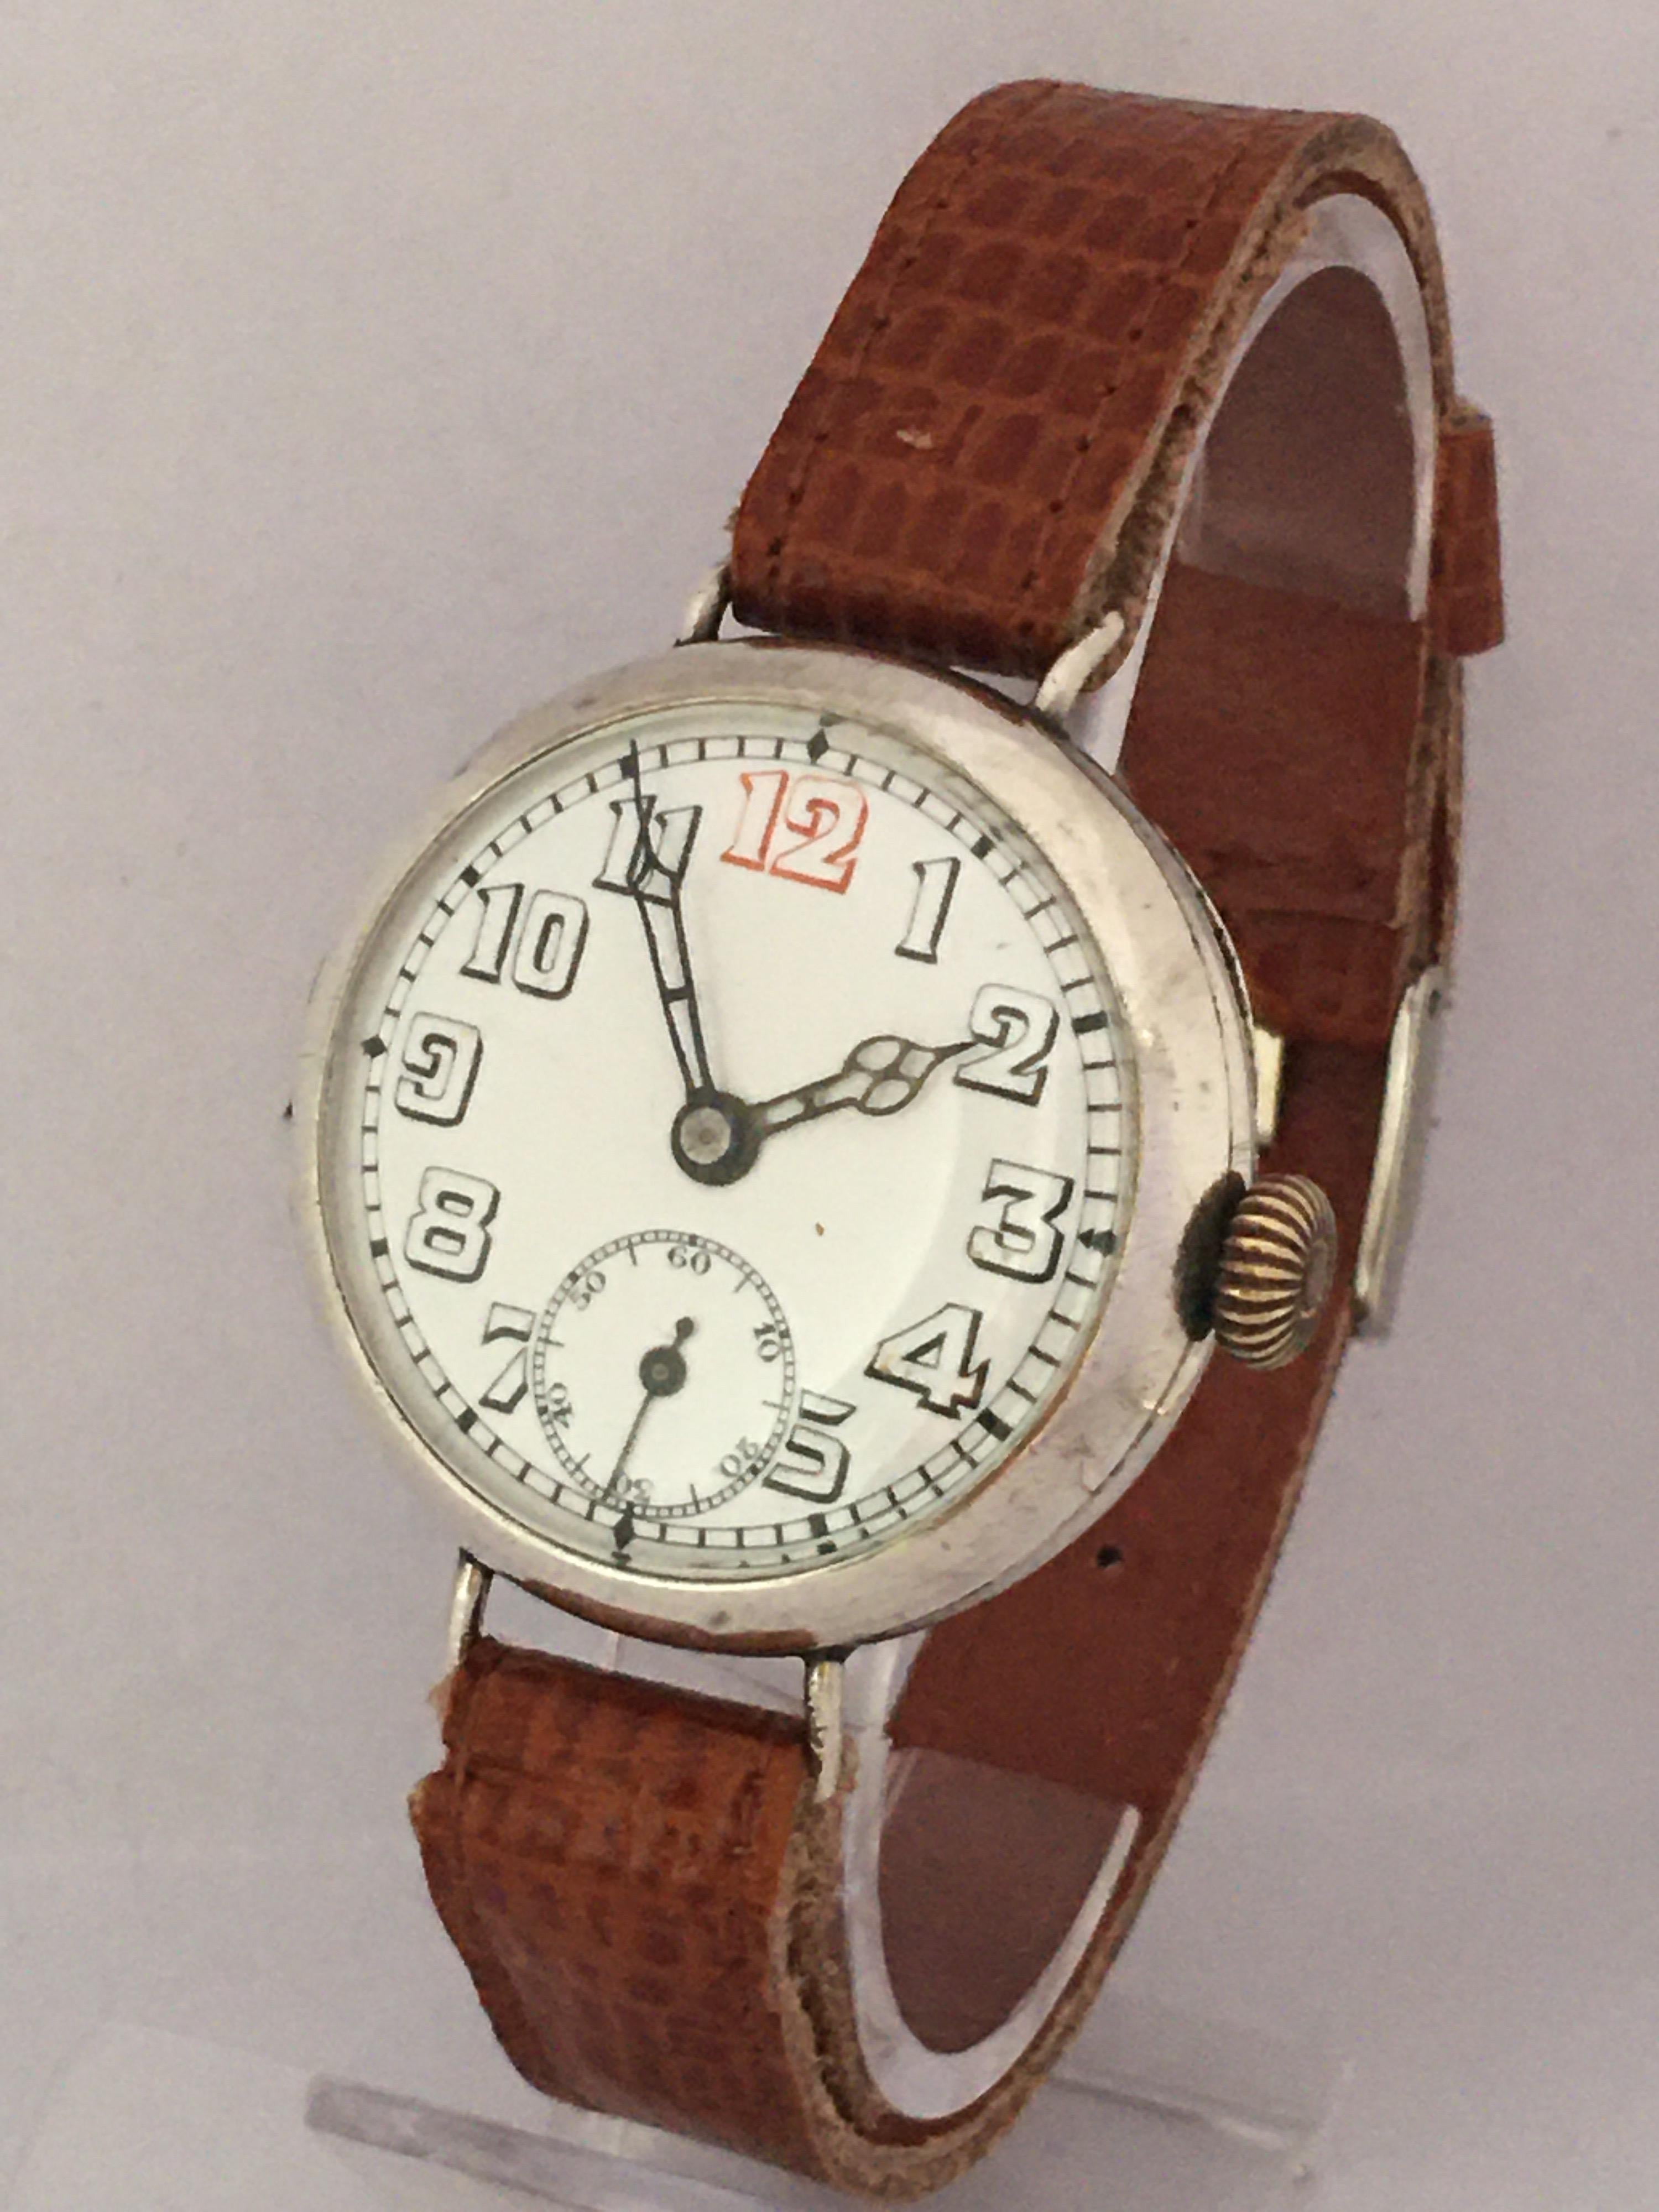 WWI period silver wire-lug gentleman's trench watch, import hallmarks London 1915, circular white enamel dial with Arabic numerals, red twelve, minute track and subsidiary seconds, cathedral hands, hinged case, modern tan leather strap,